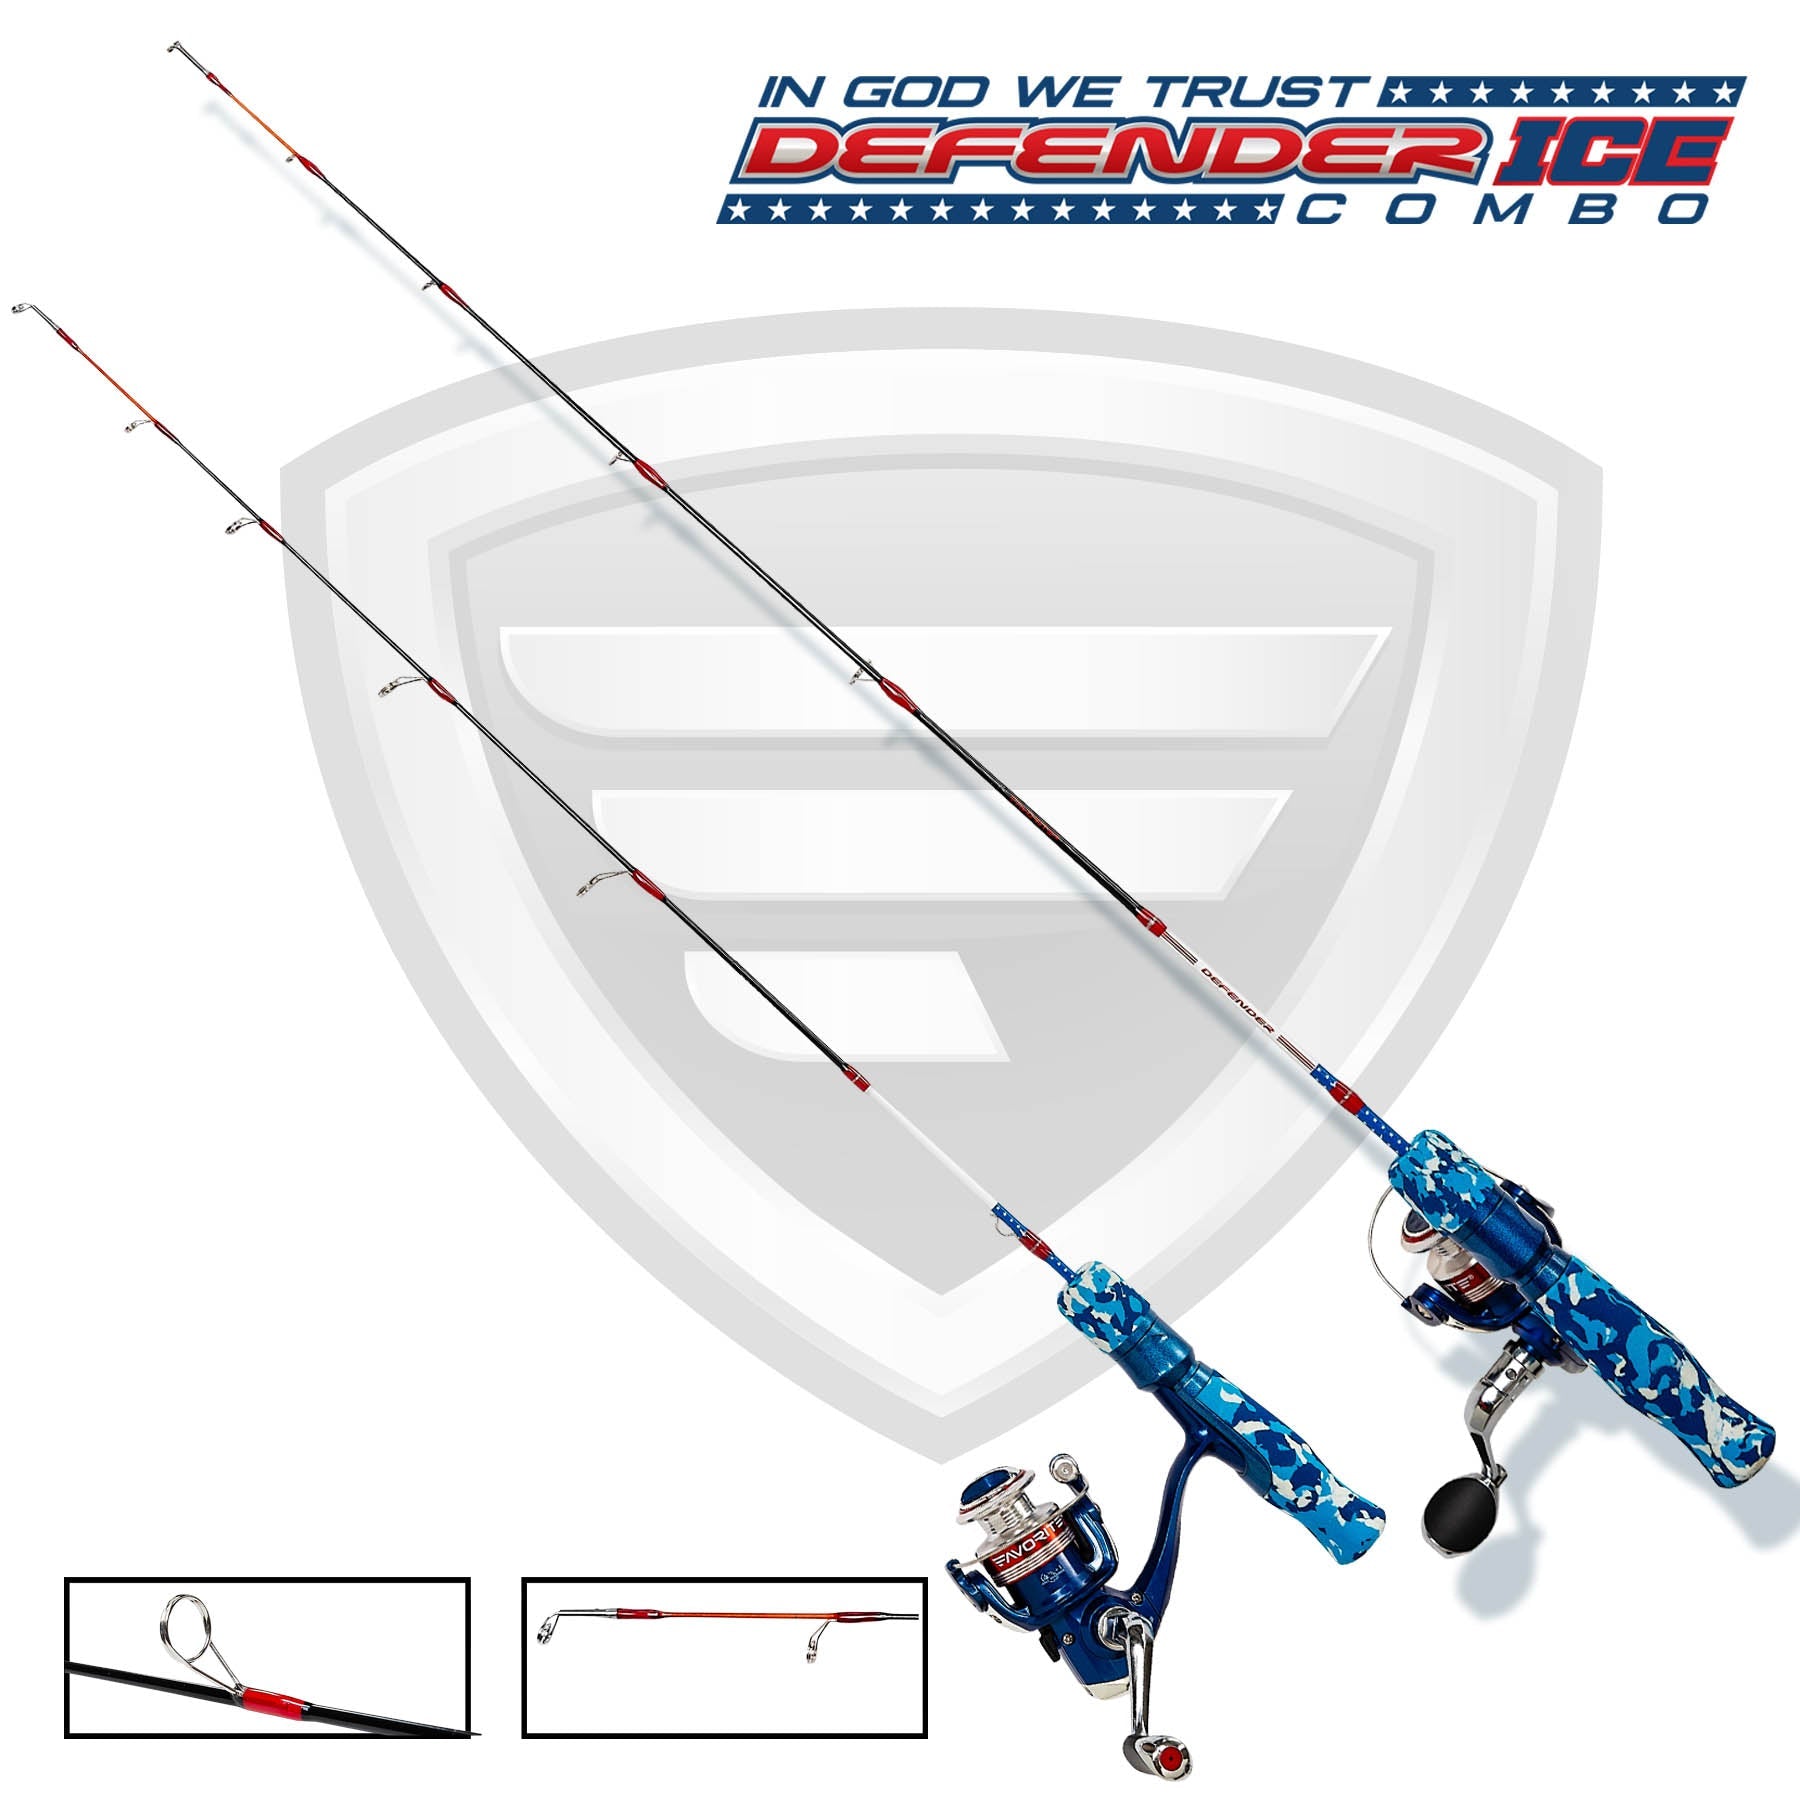 RED WHITE AND BLUE 🇺🇸💪 Learn more about the DEFENDER lineup at  favoriteusa.com #favoriterods #favoritefishing #bassfishing #bass #fishing  #fishinglife #fishingislife #largemouthbass #fish #smallmouthbass #reels  #fishingreel #outdoors #kayaking